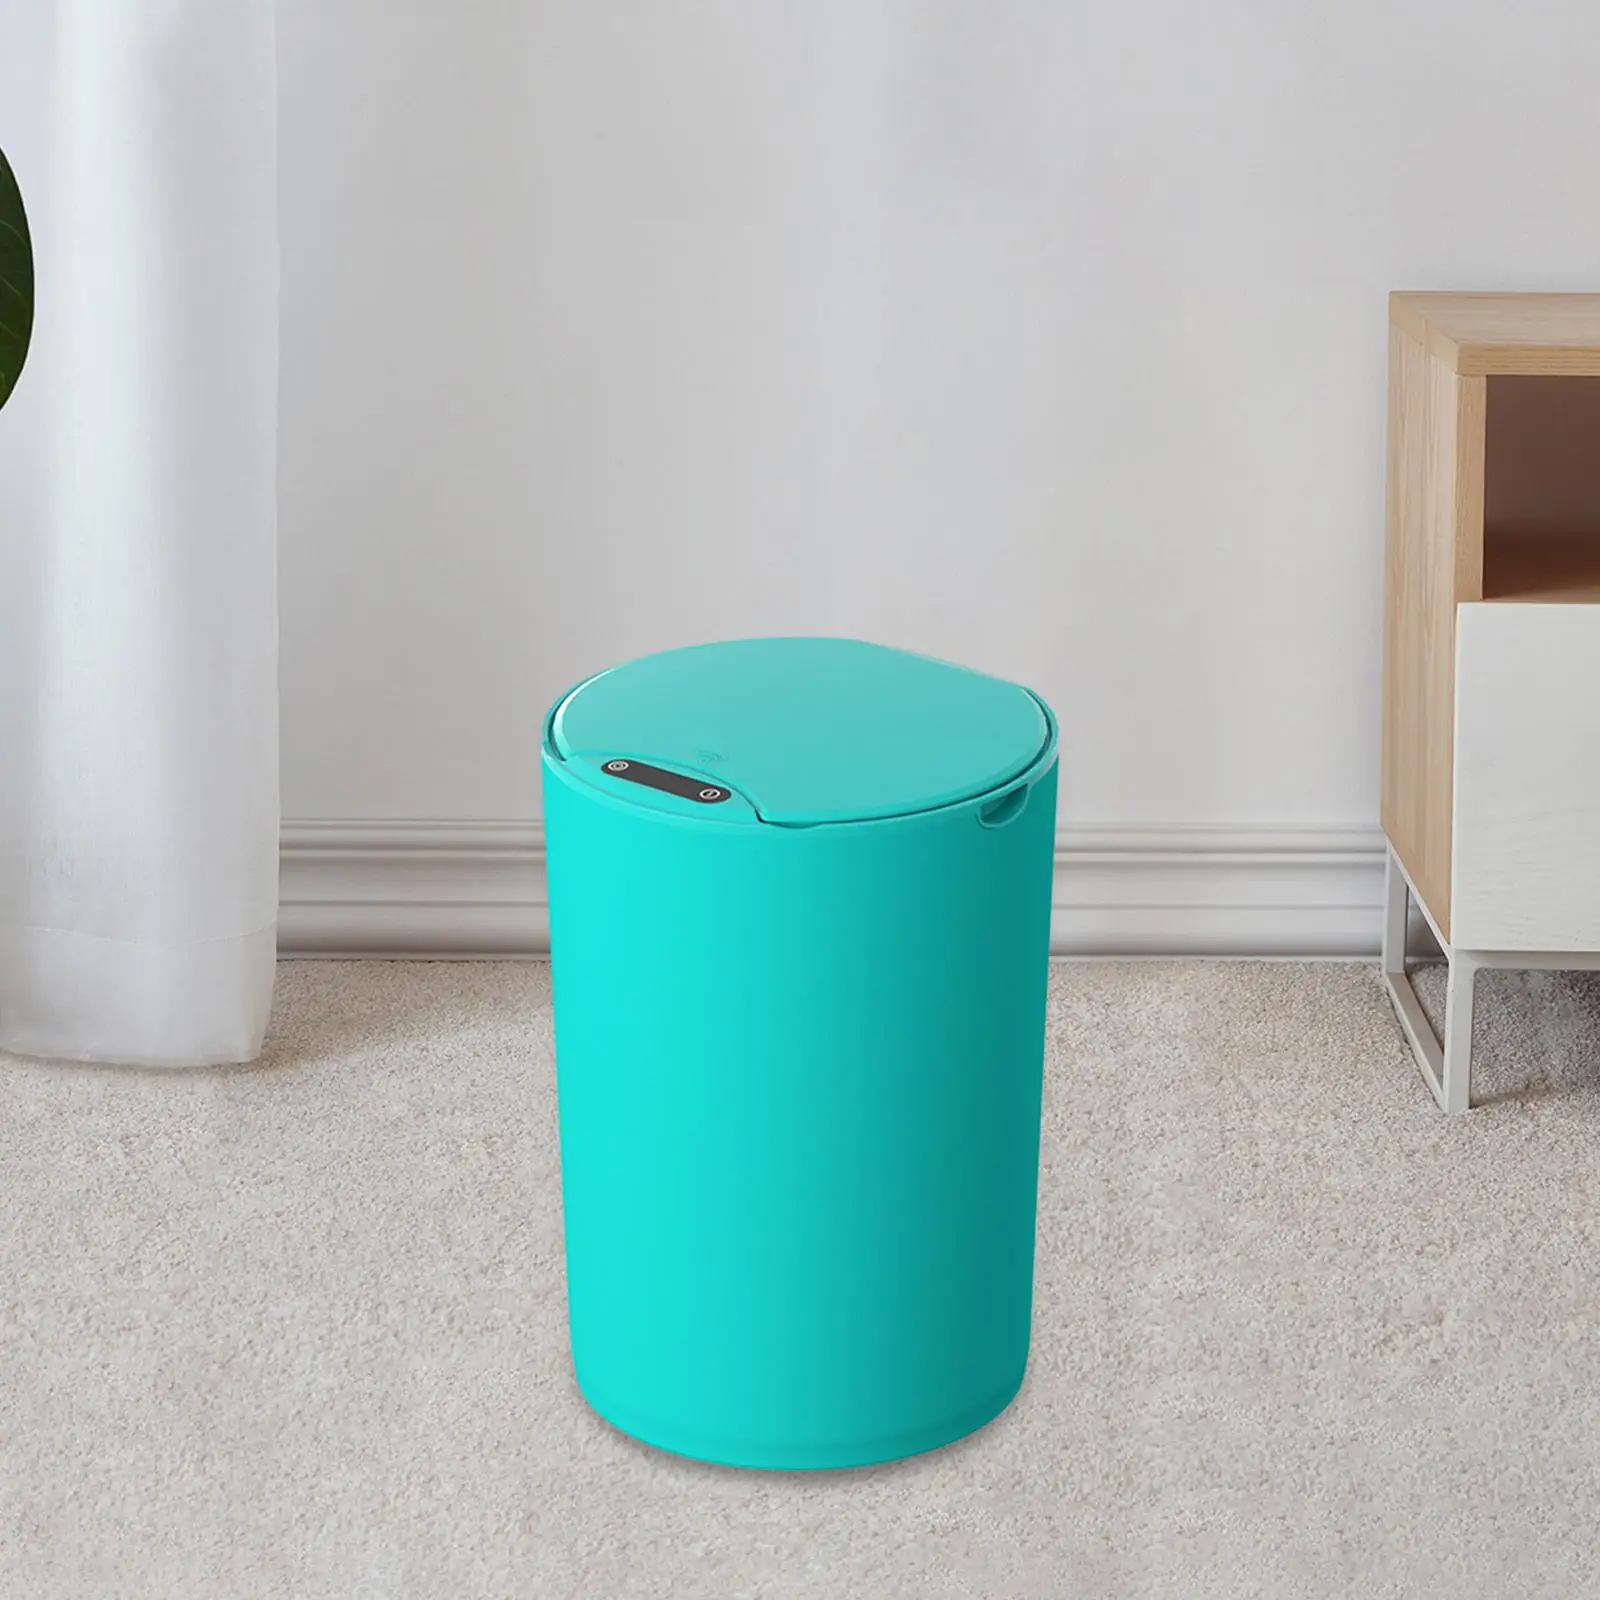 Automatic Trash Can Durable Silent Opening and Closing Multifunctional Smooth Surface Wastebasket Smart Trash Can for Kitchen